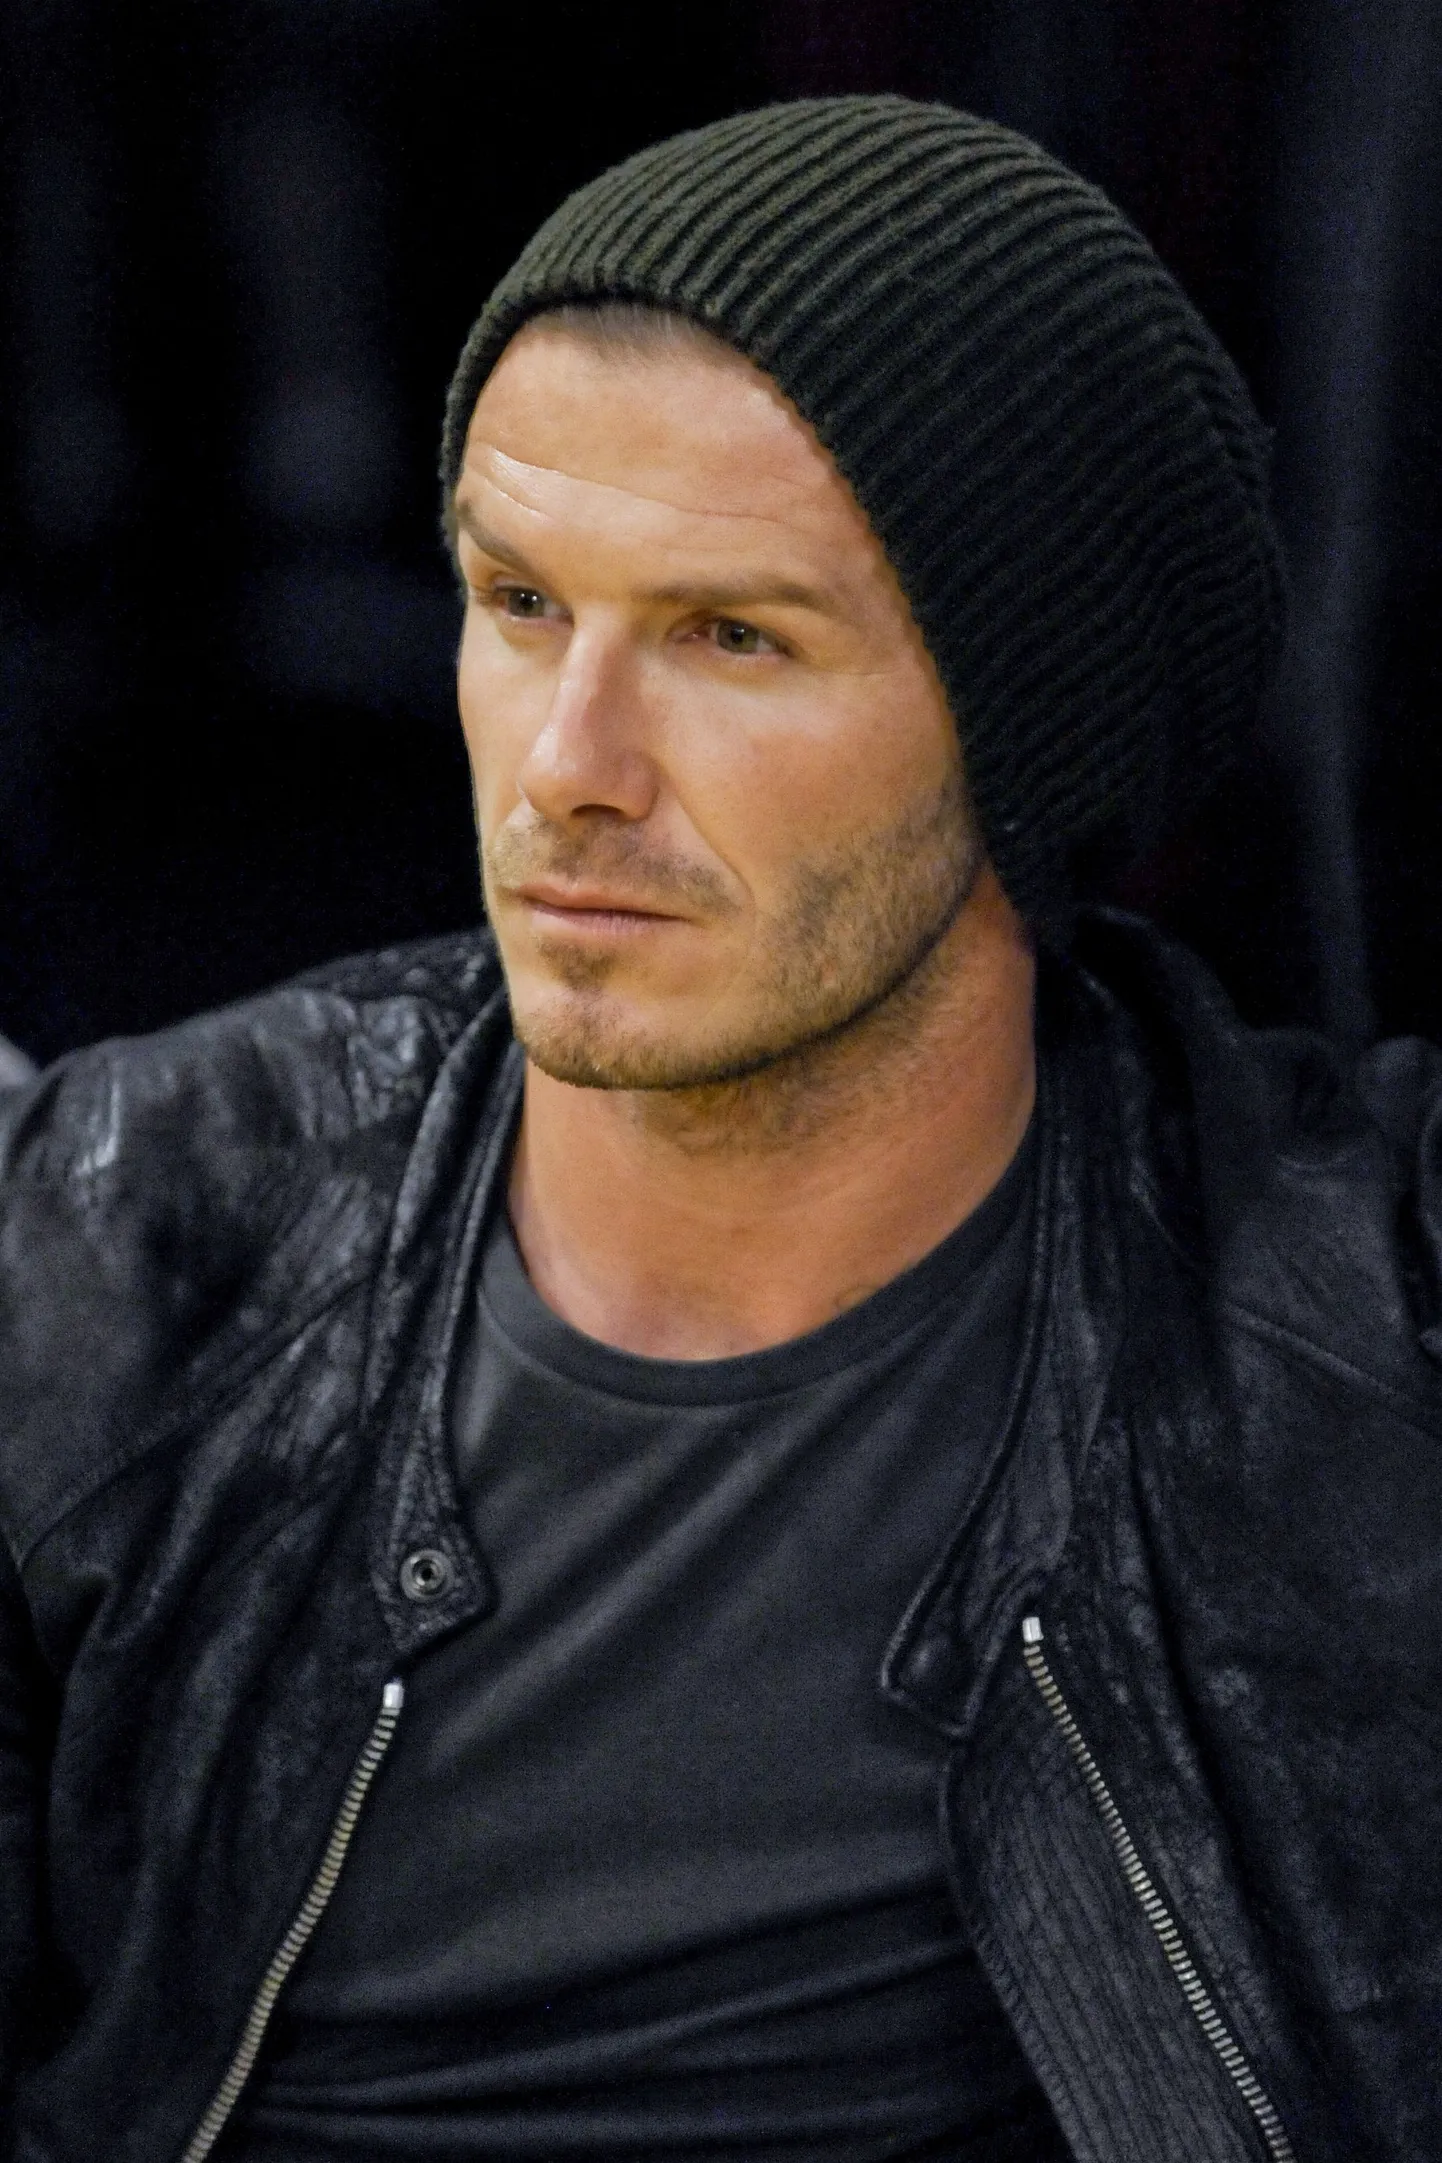 Soccer star David Beckham attends an NBA basketball game between the Boston Celtics and the Los Angeles Lakers, Sunday, March 11, 2012, in Los Angeles. The Lakers won 97-94. (AP Photo/Gus Ruelas) / SCANPIX Code: 436